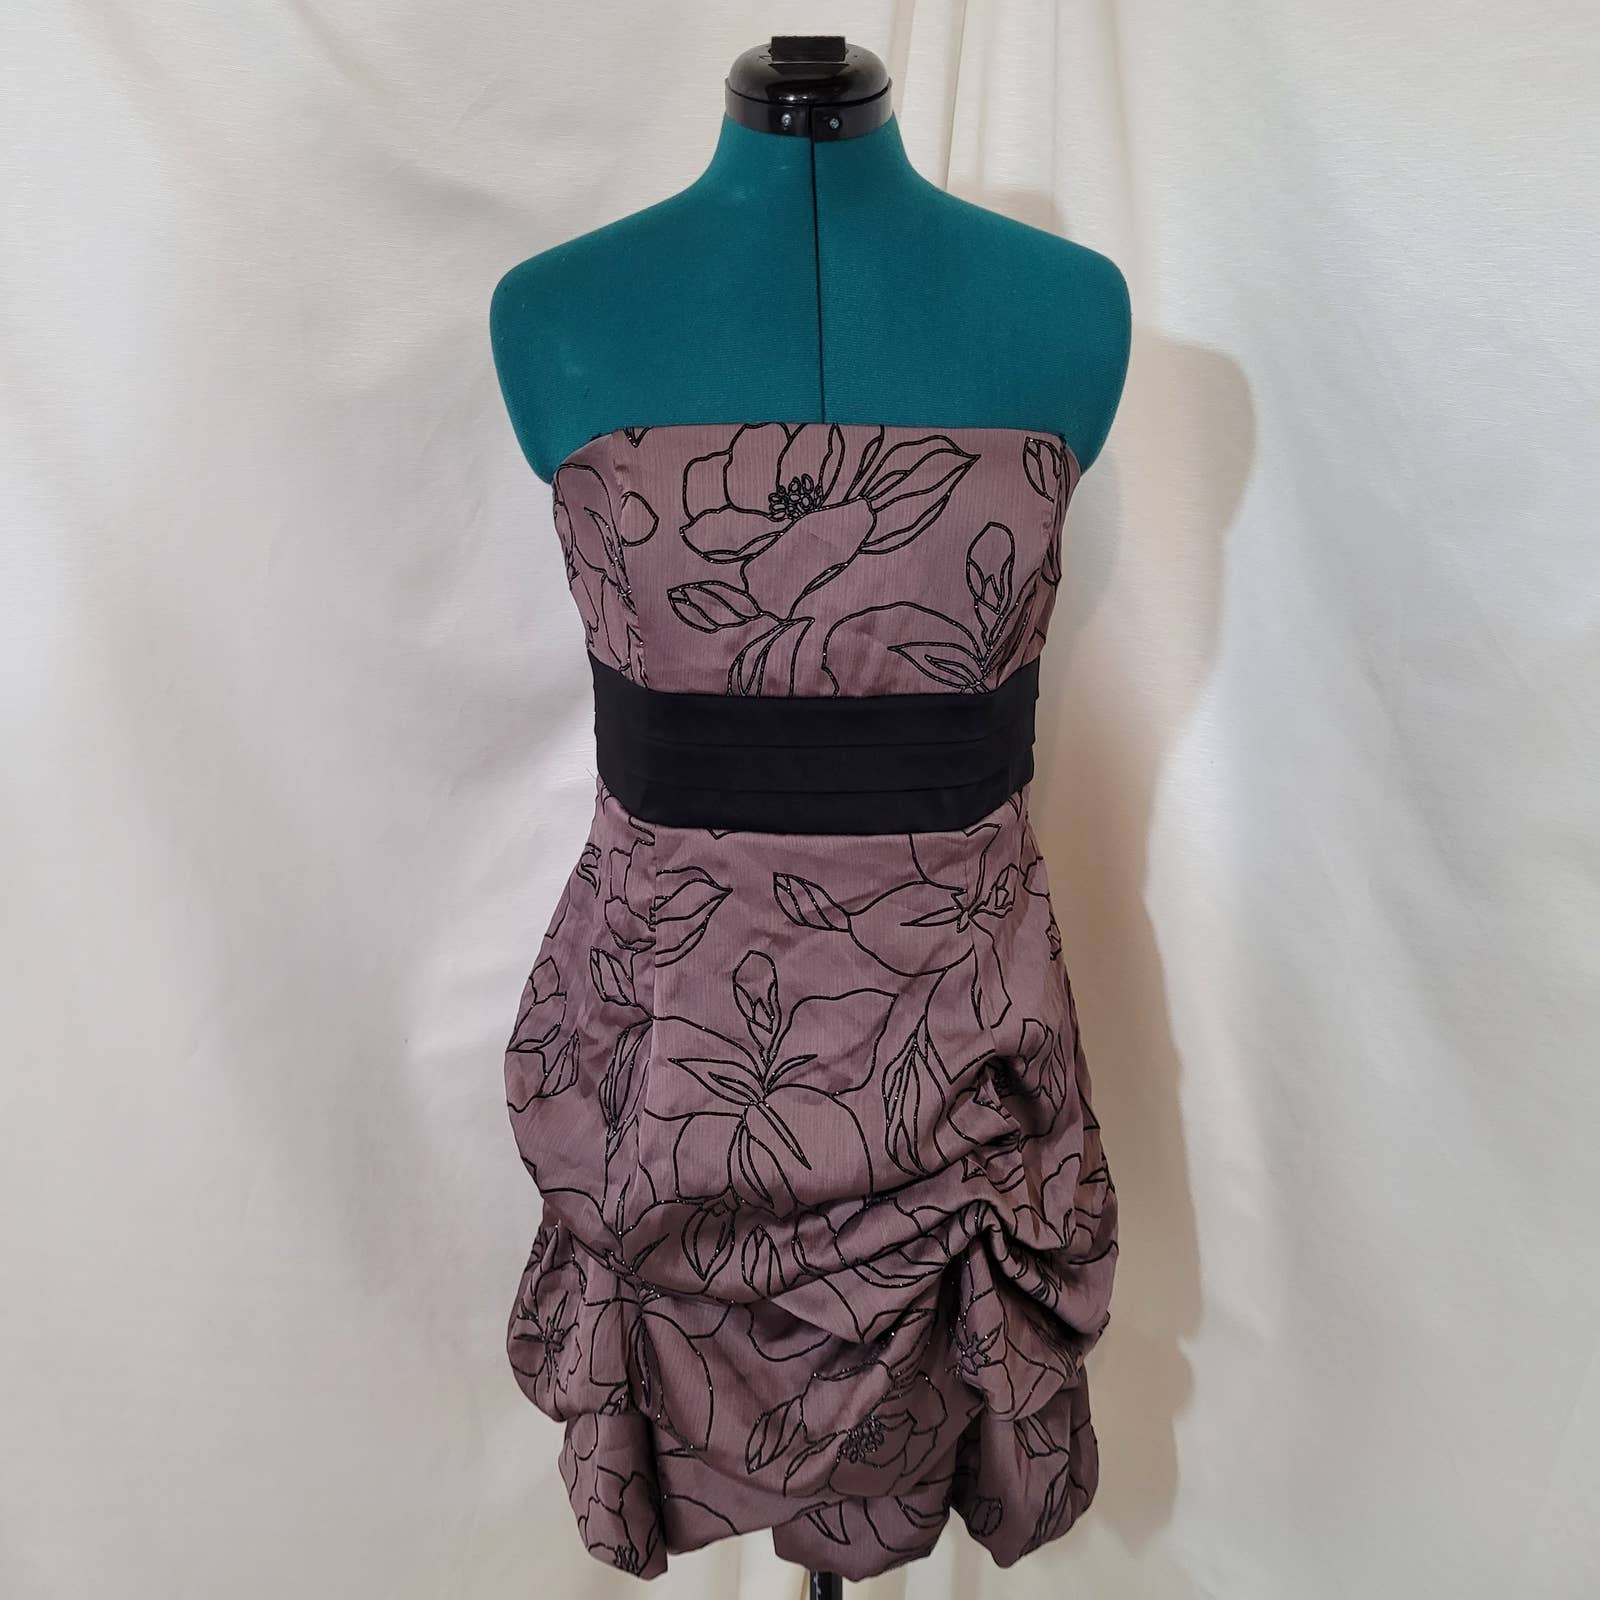 Le Chateau Brown Floral Strapless Sparkly Dress - Size LargeMarkita's Closetle chateau